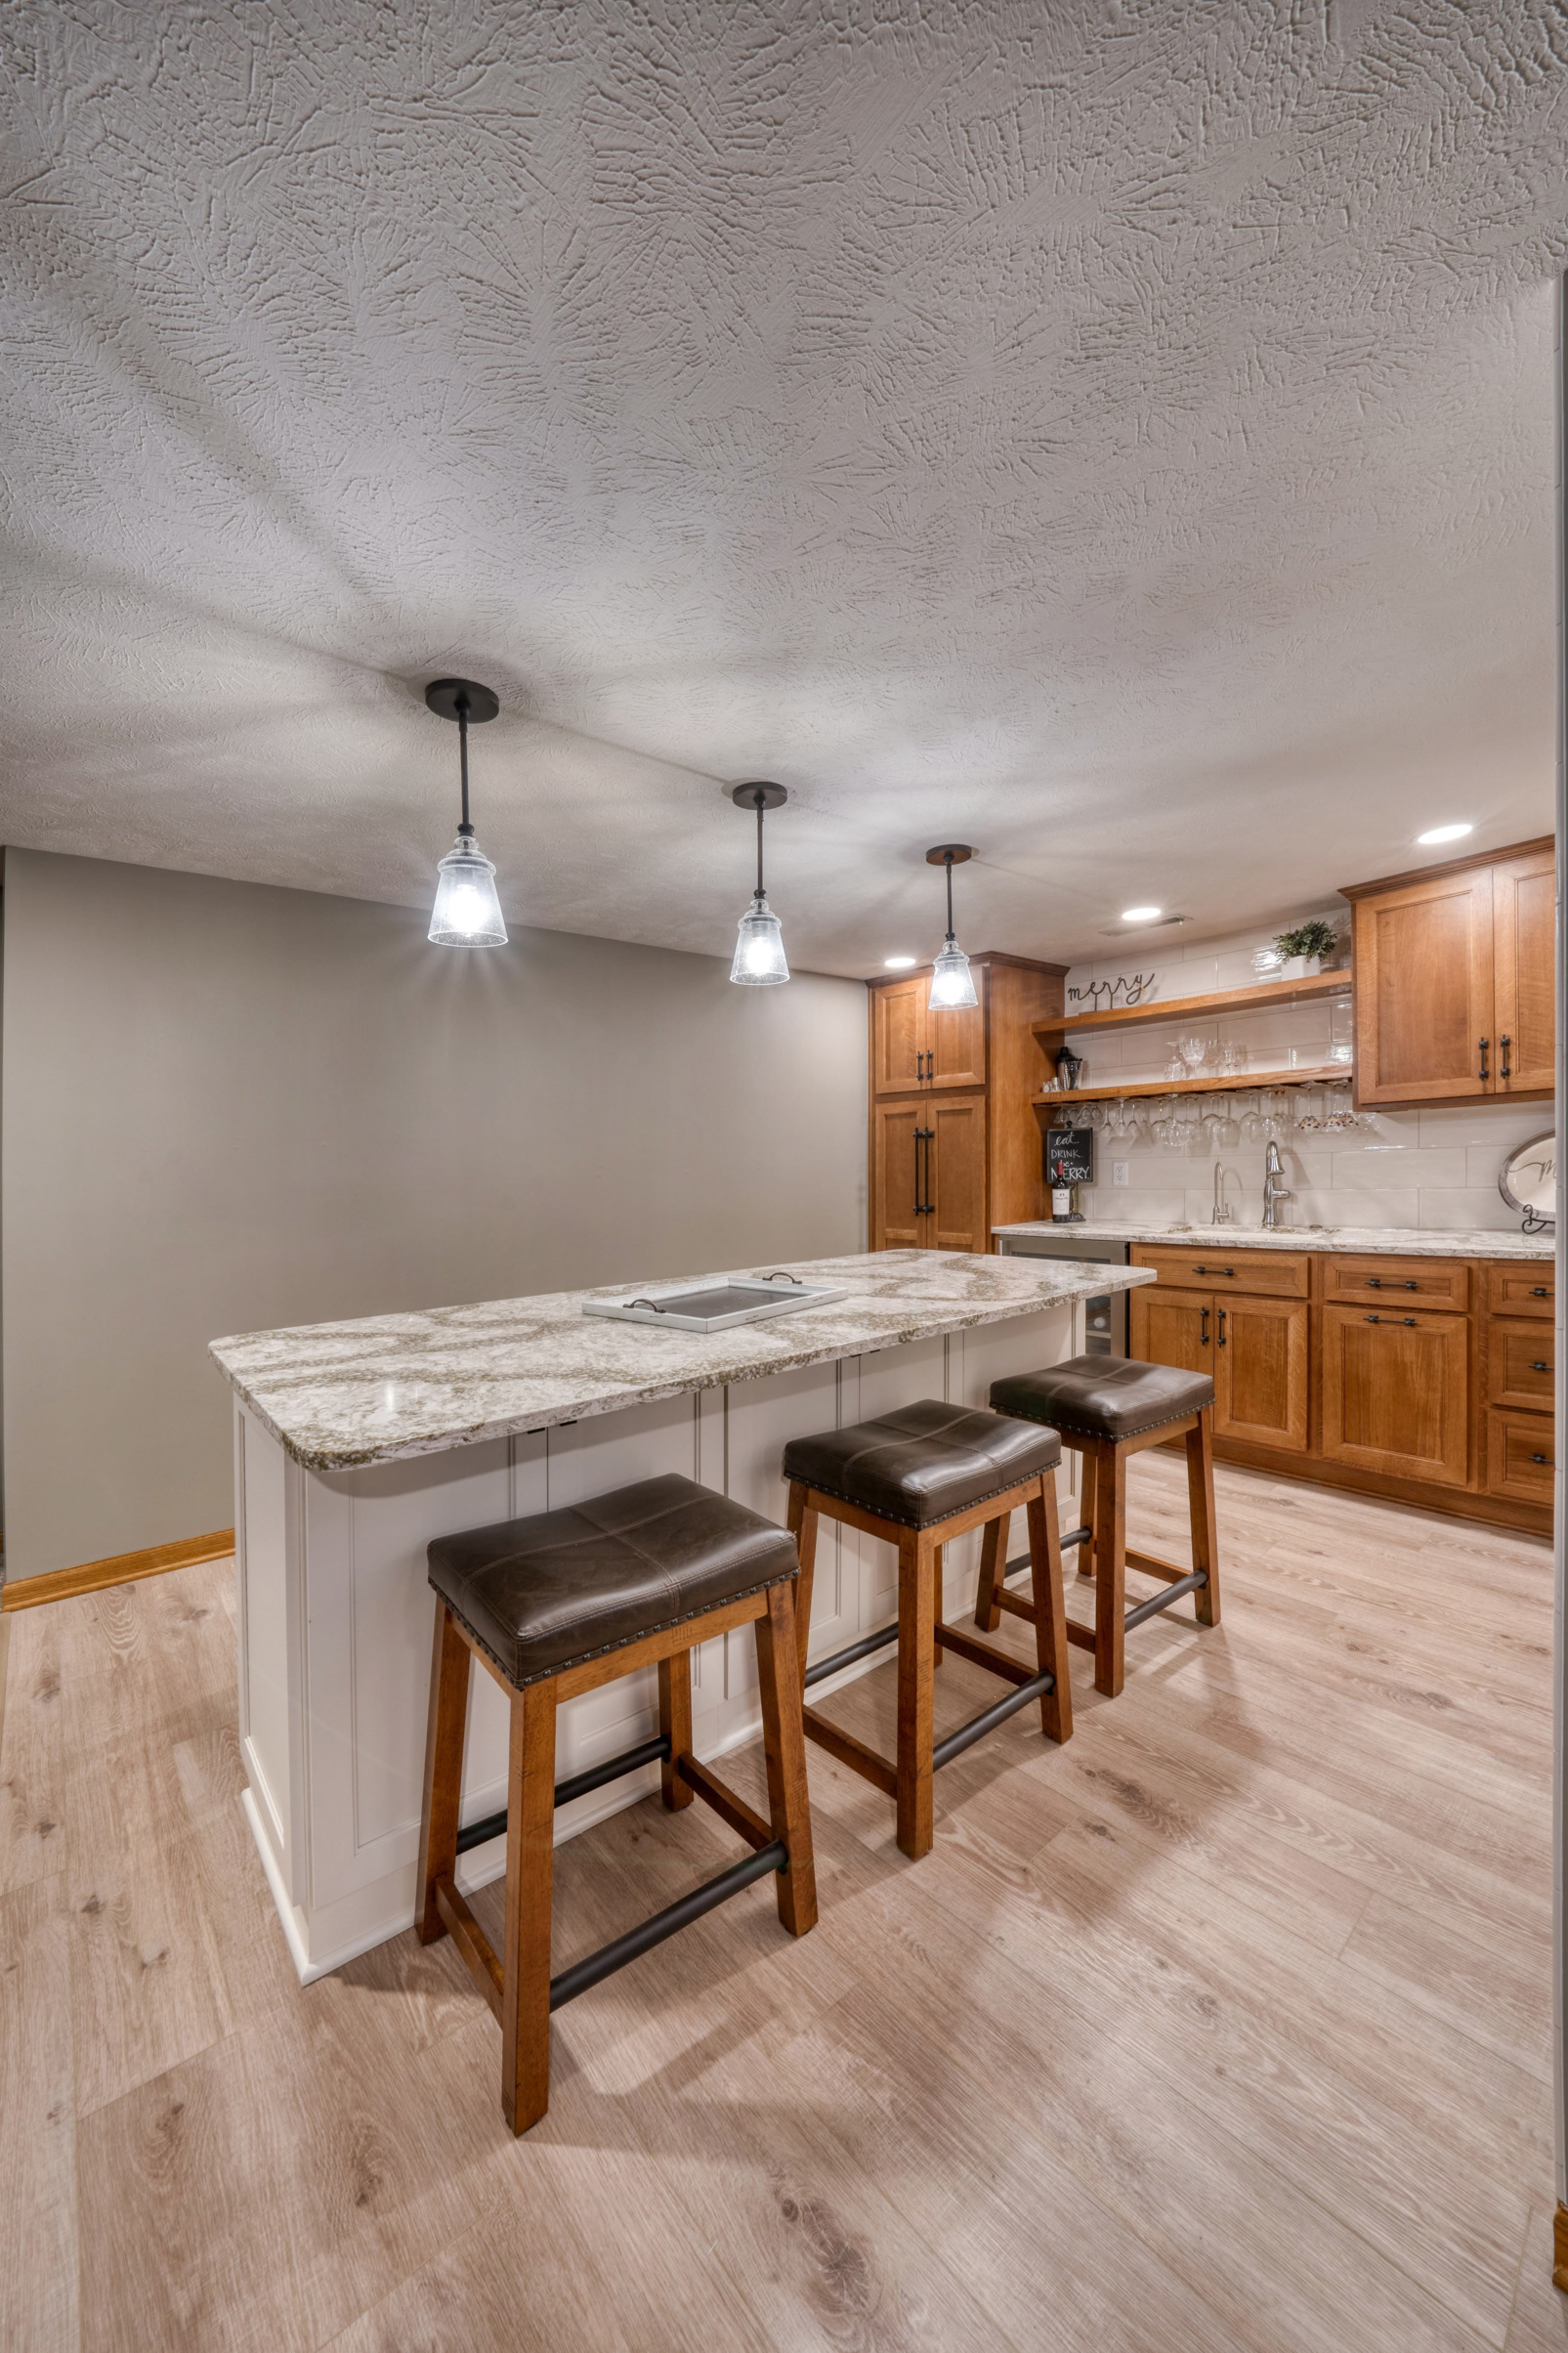 Remodeled basement kitchen with recessed lighting, a large island with pendant lighting overhead, and wooden cabinetry with a white backsplash.